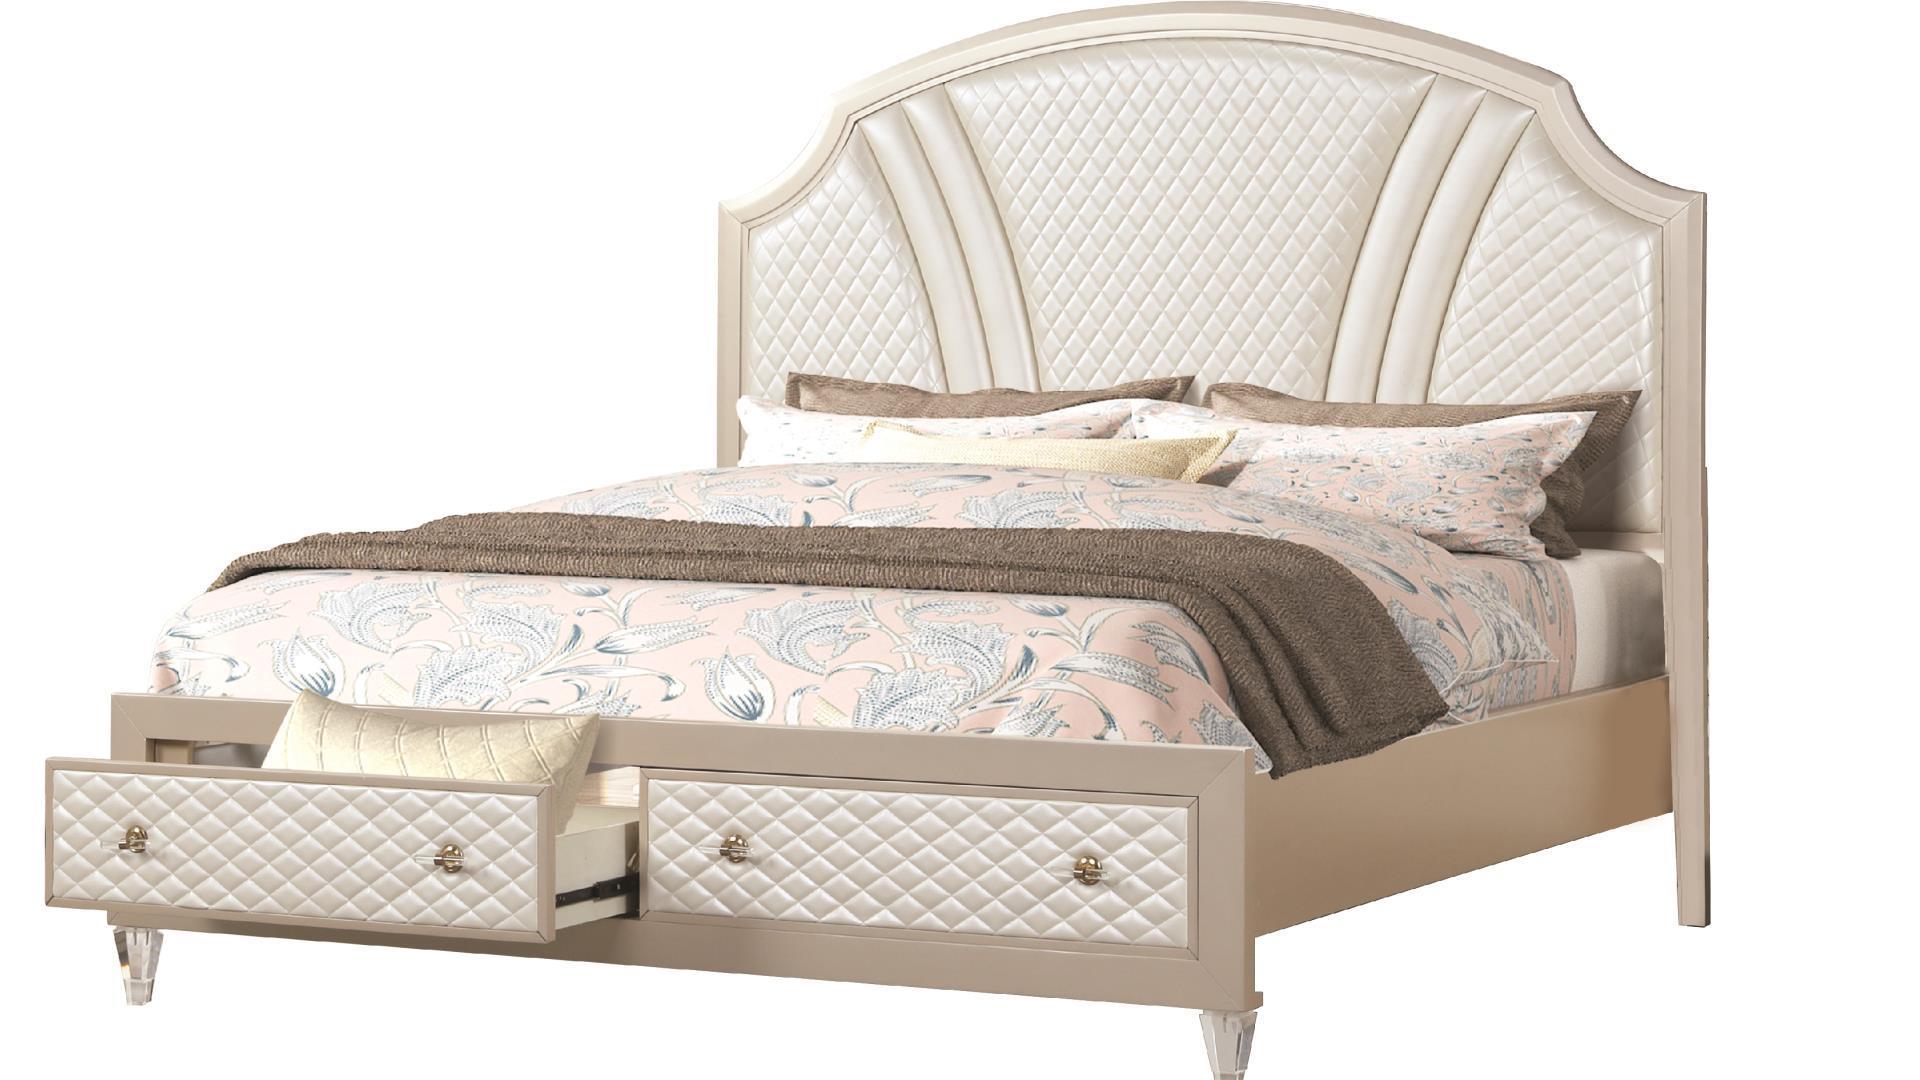 Contemporary, Modern Storage Bed TIFFANY TIFFANY-Q in Ivory, Champagne Eco-Leather